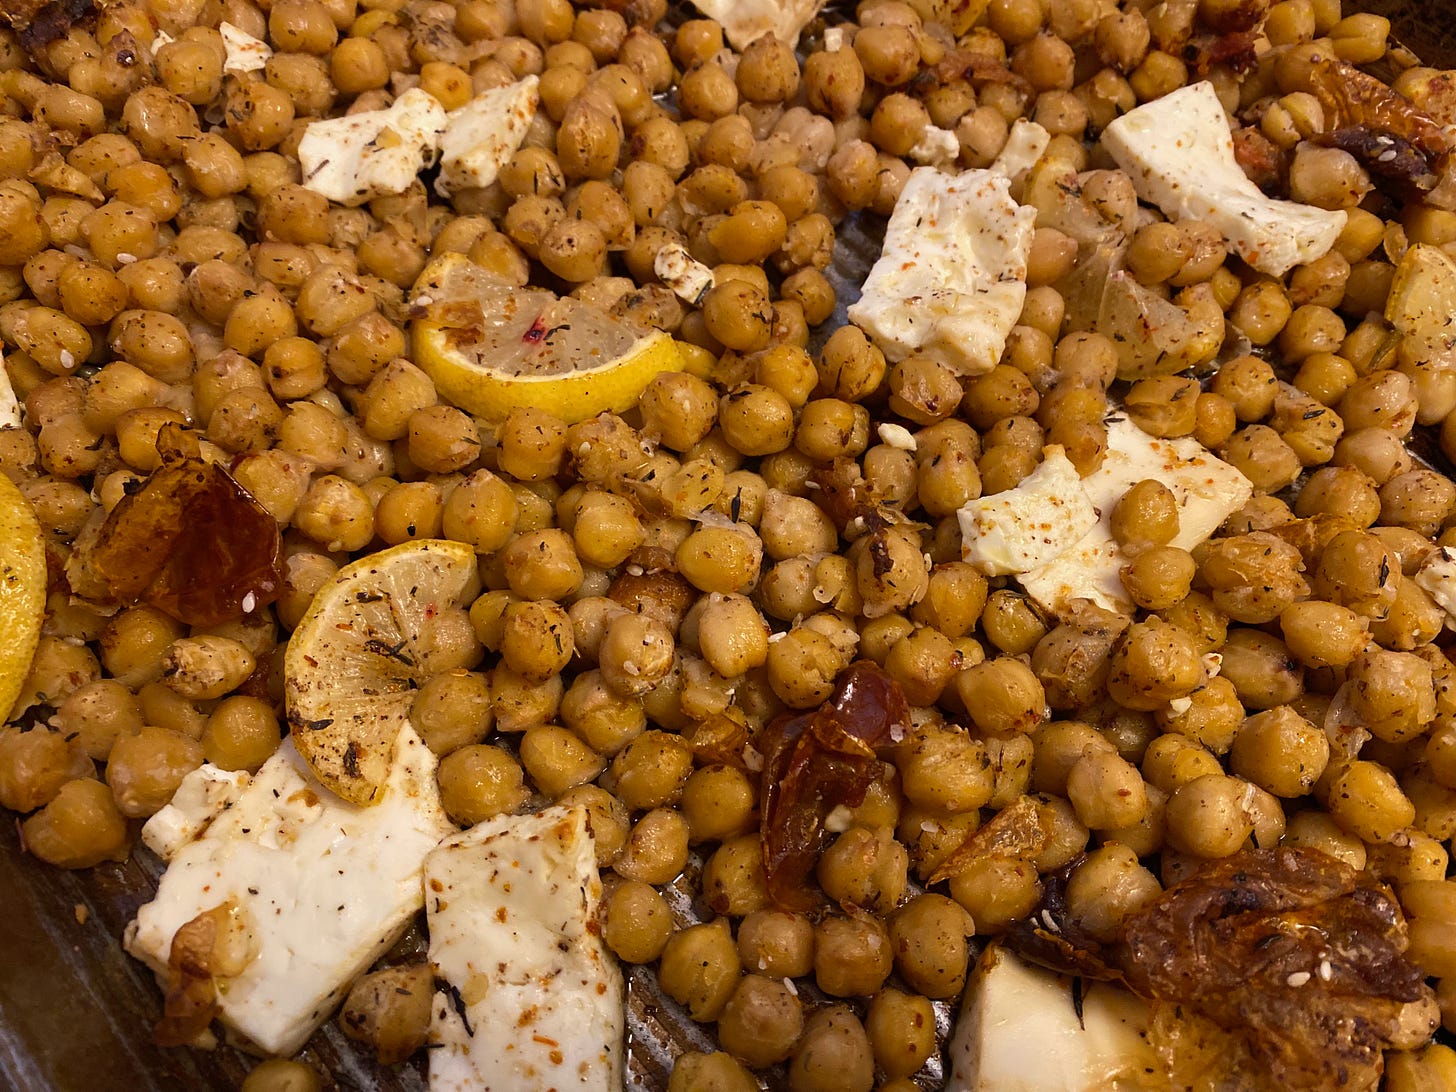 A tray of roasted chickpeas, with slabs of feta, dried tomatoes, and sliced lemons nestled among them.